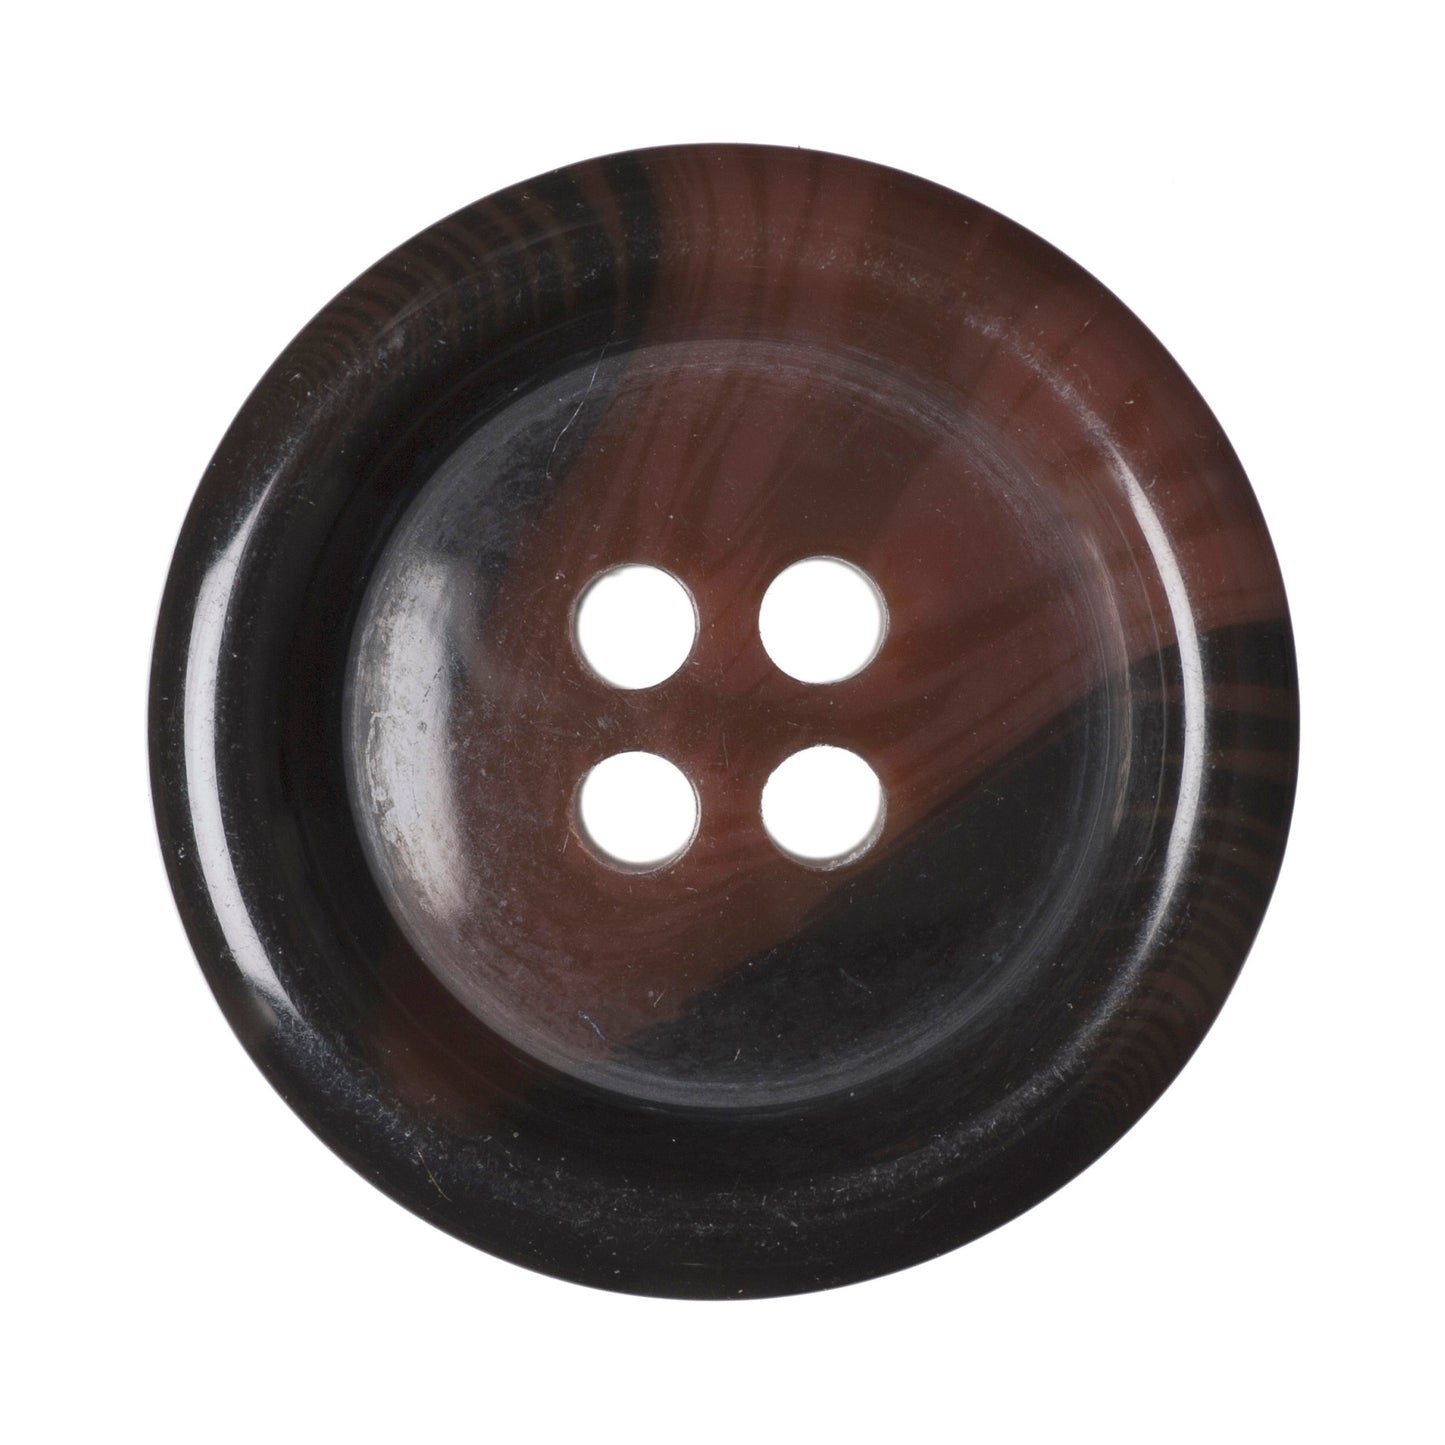 4 Hole Variegated Jacket Button - 23mm - Tan [LB14.4]